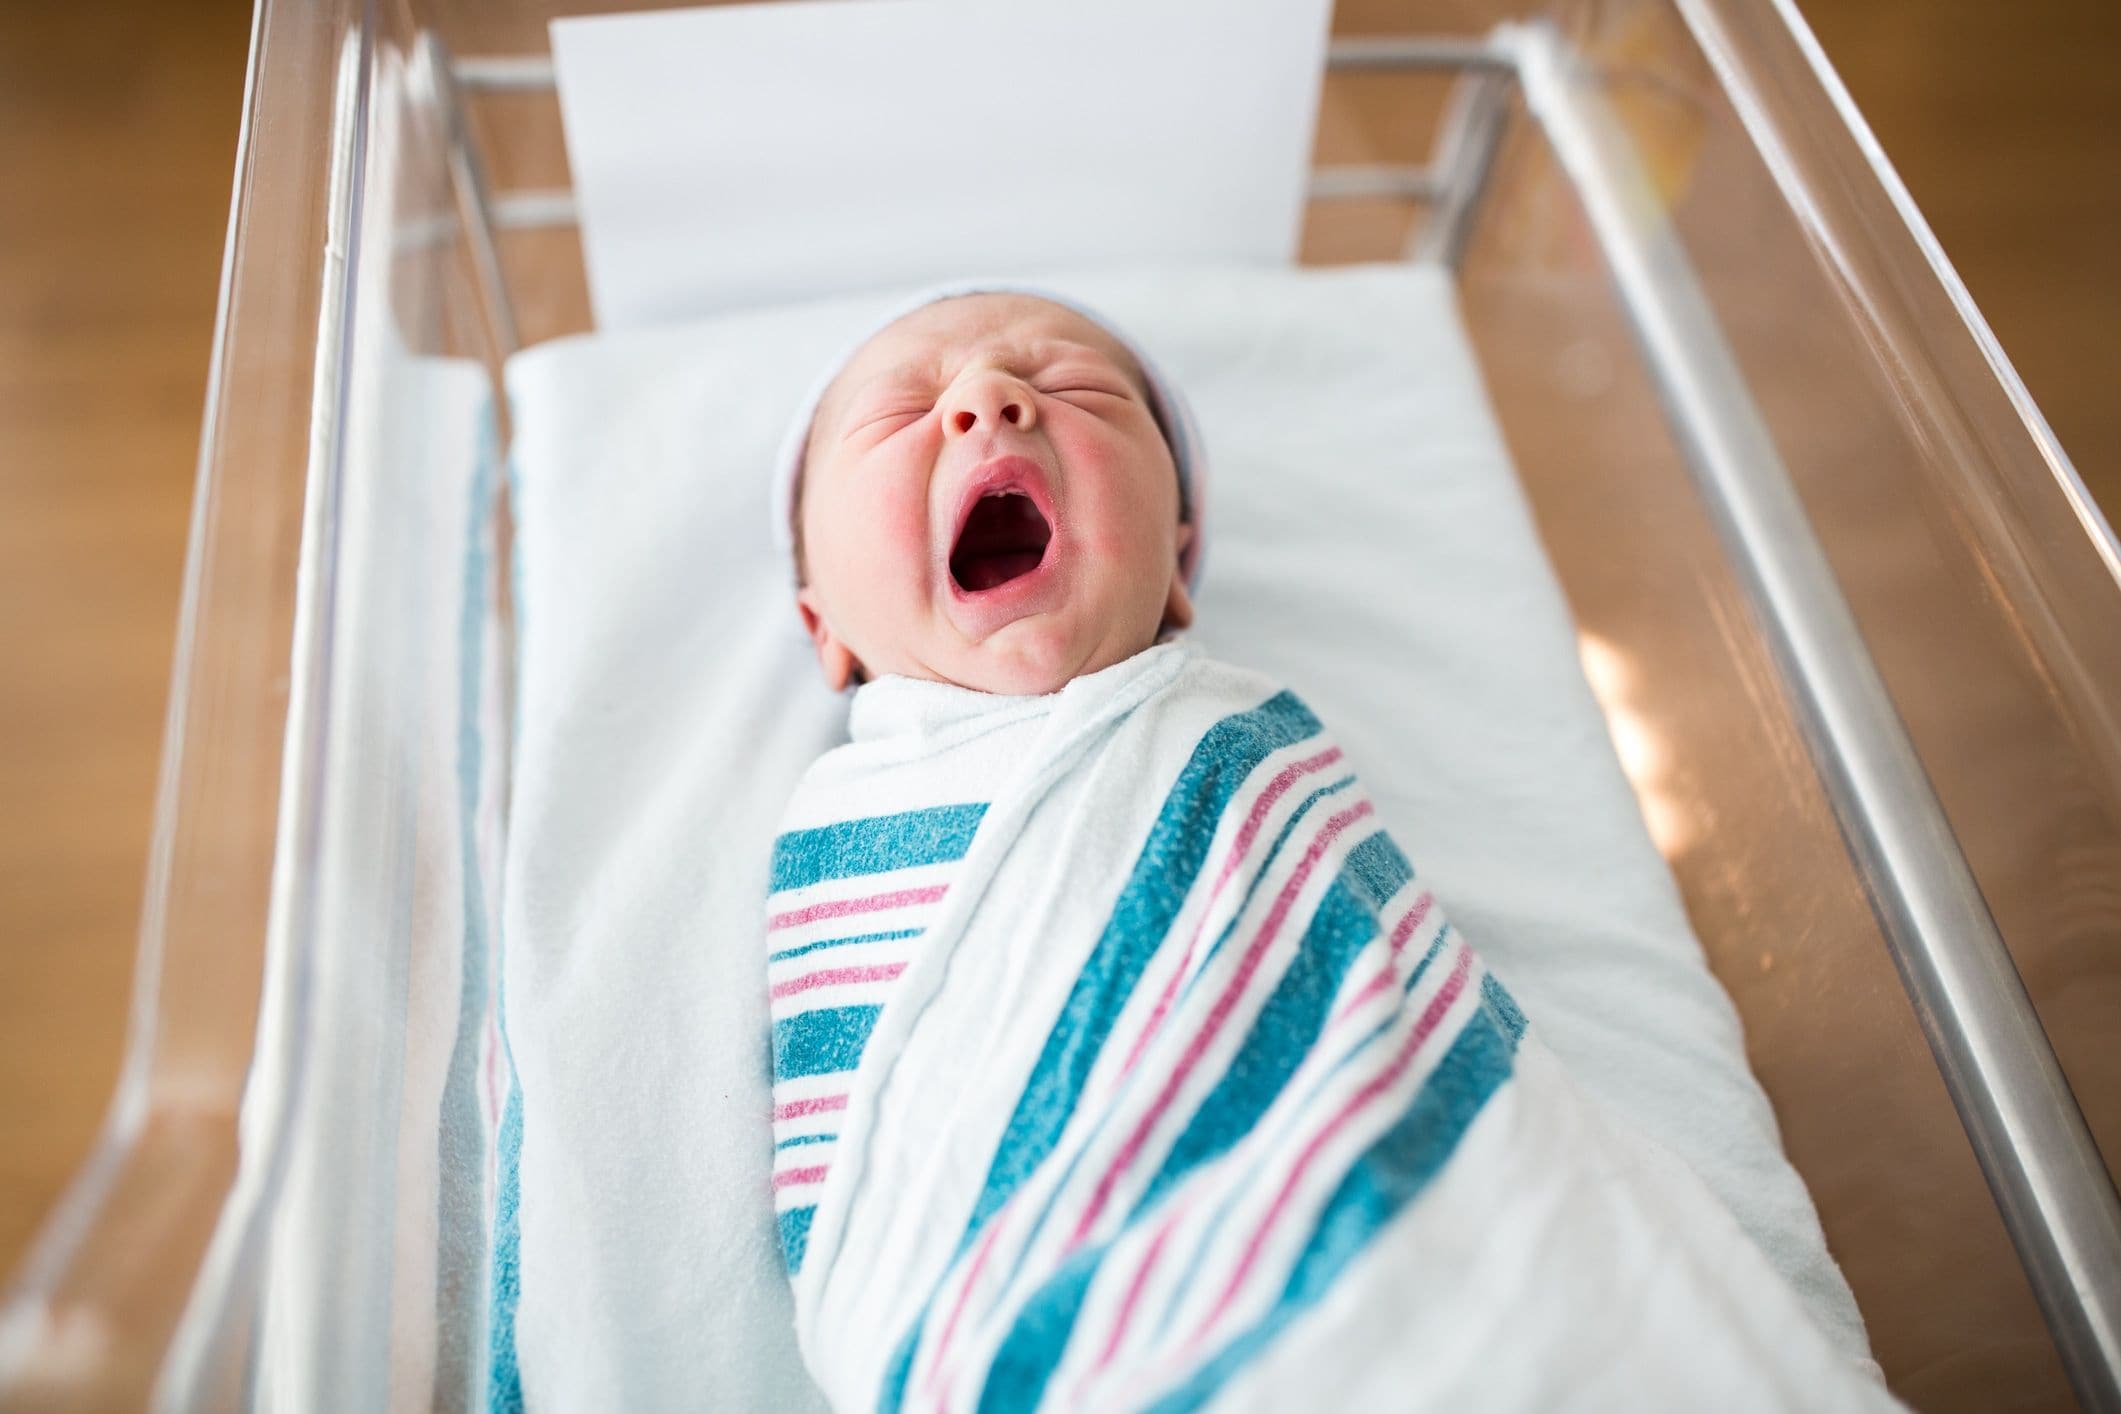 What is a receiving blanket and how can parents use them?